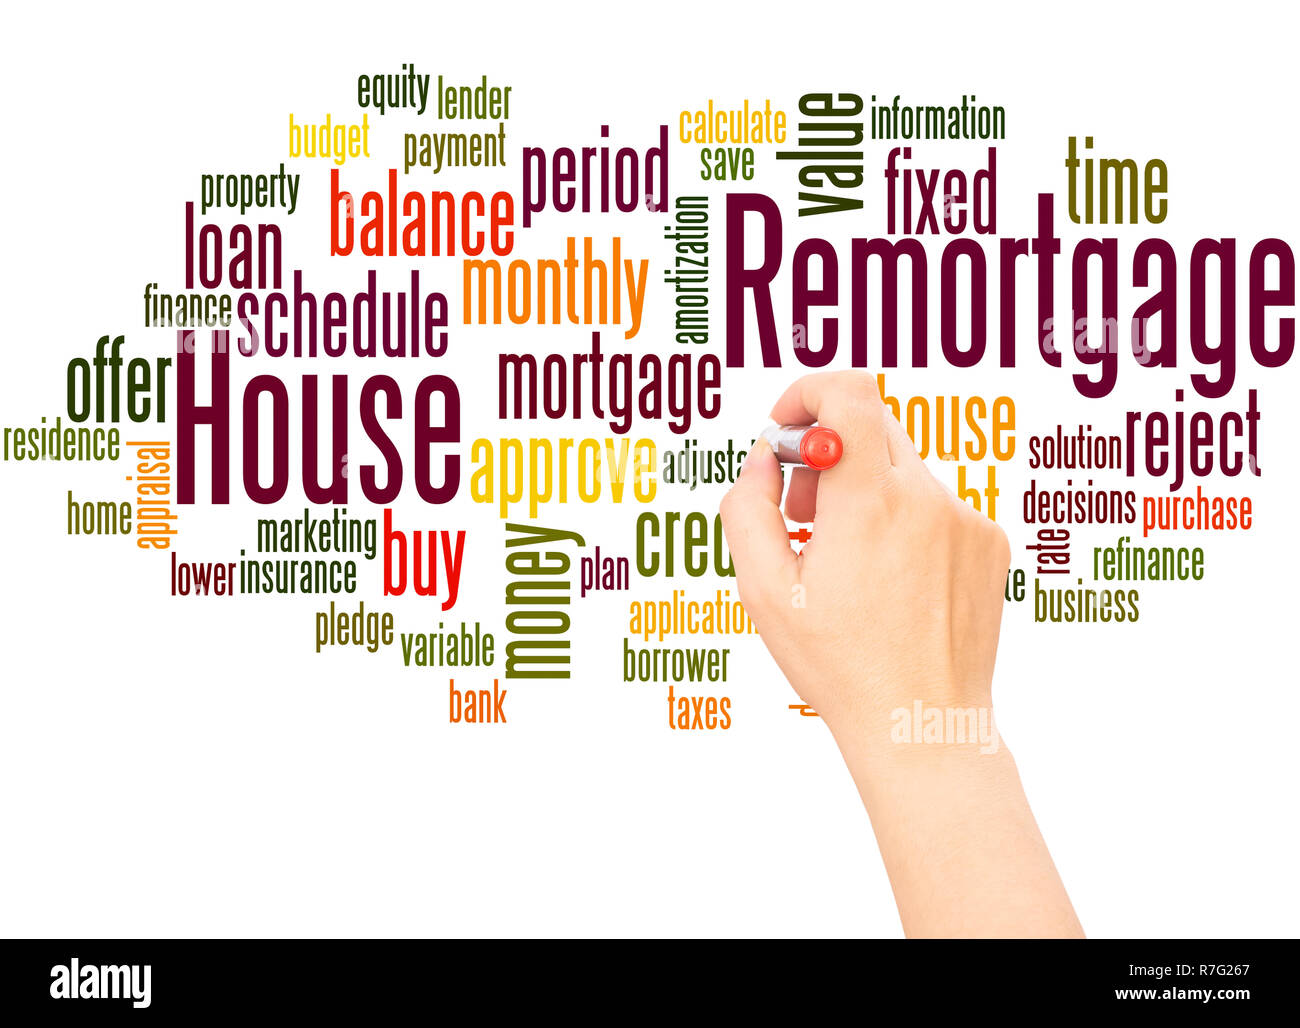 House Remortgage word cloud hand writing concept on white background. Stock Photo